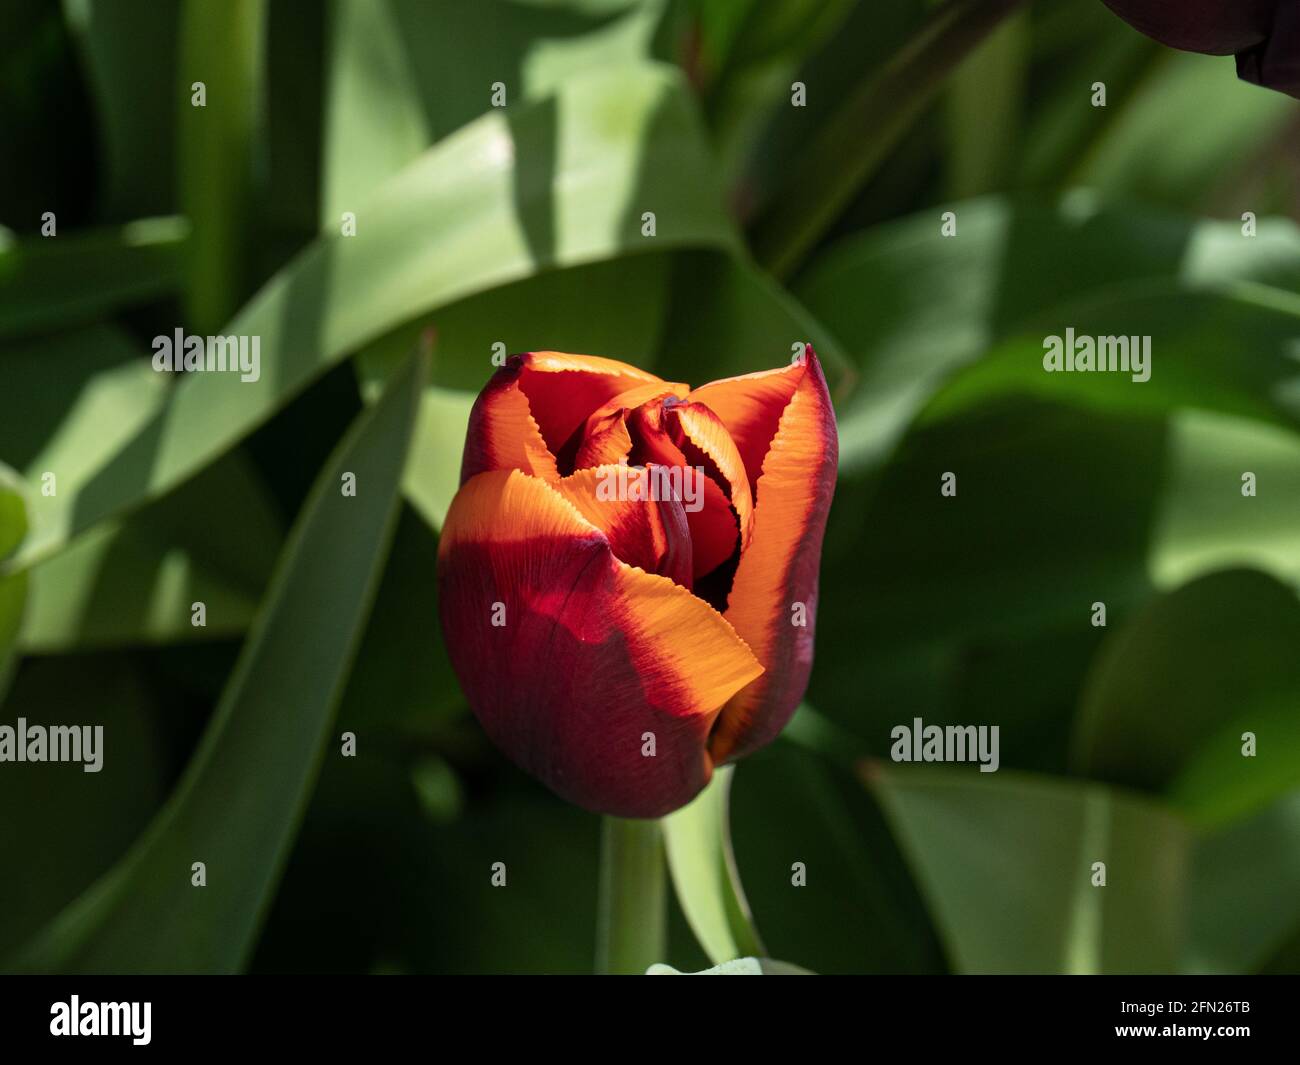 A close up of a single burgundy and copper flower of Tulip Slawa Stock Photo